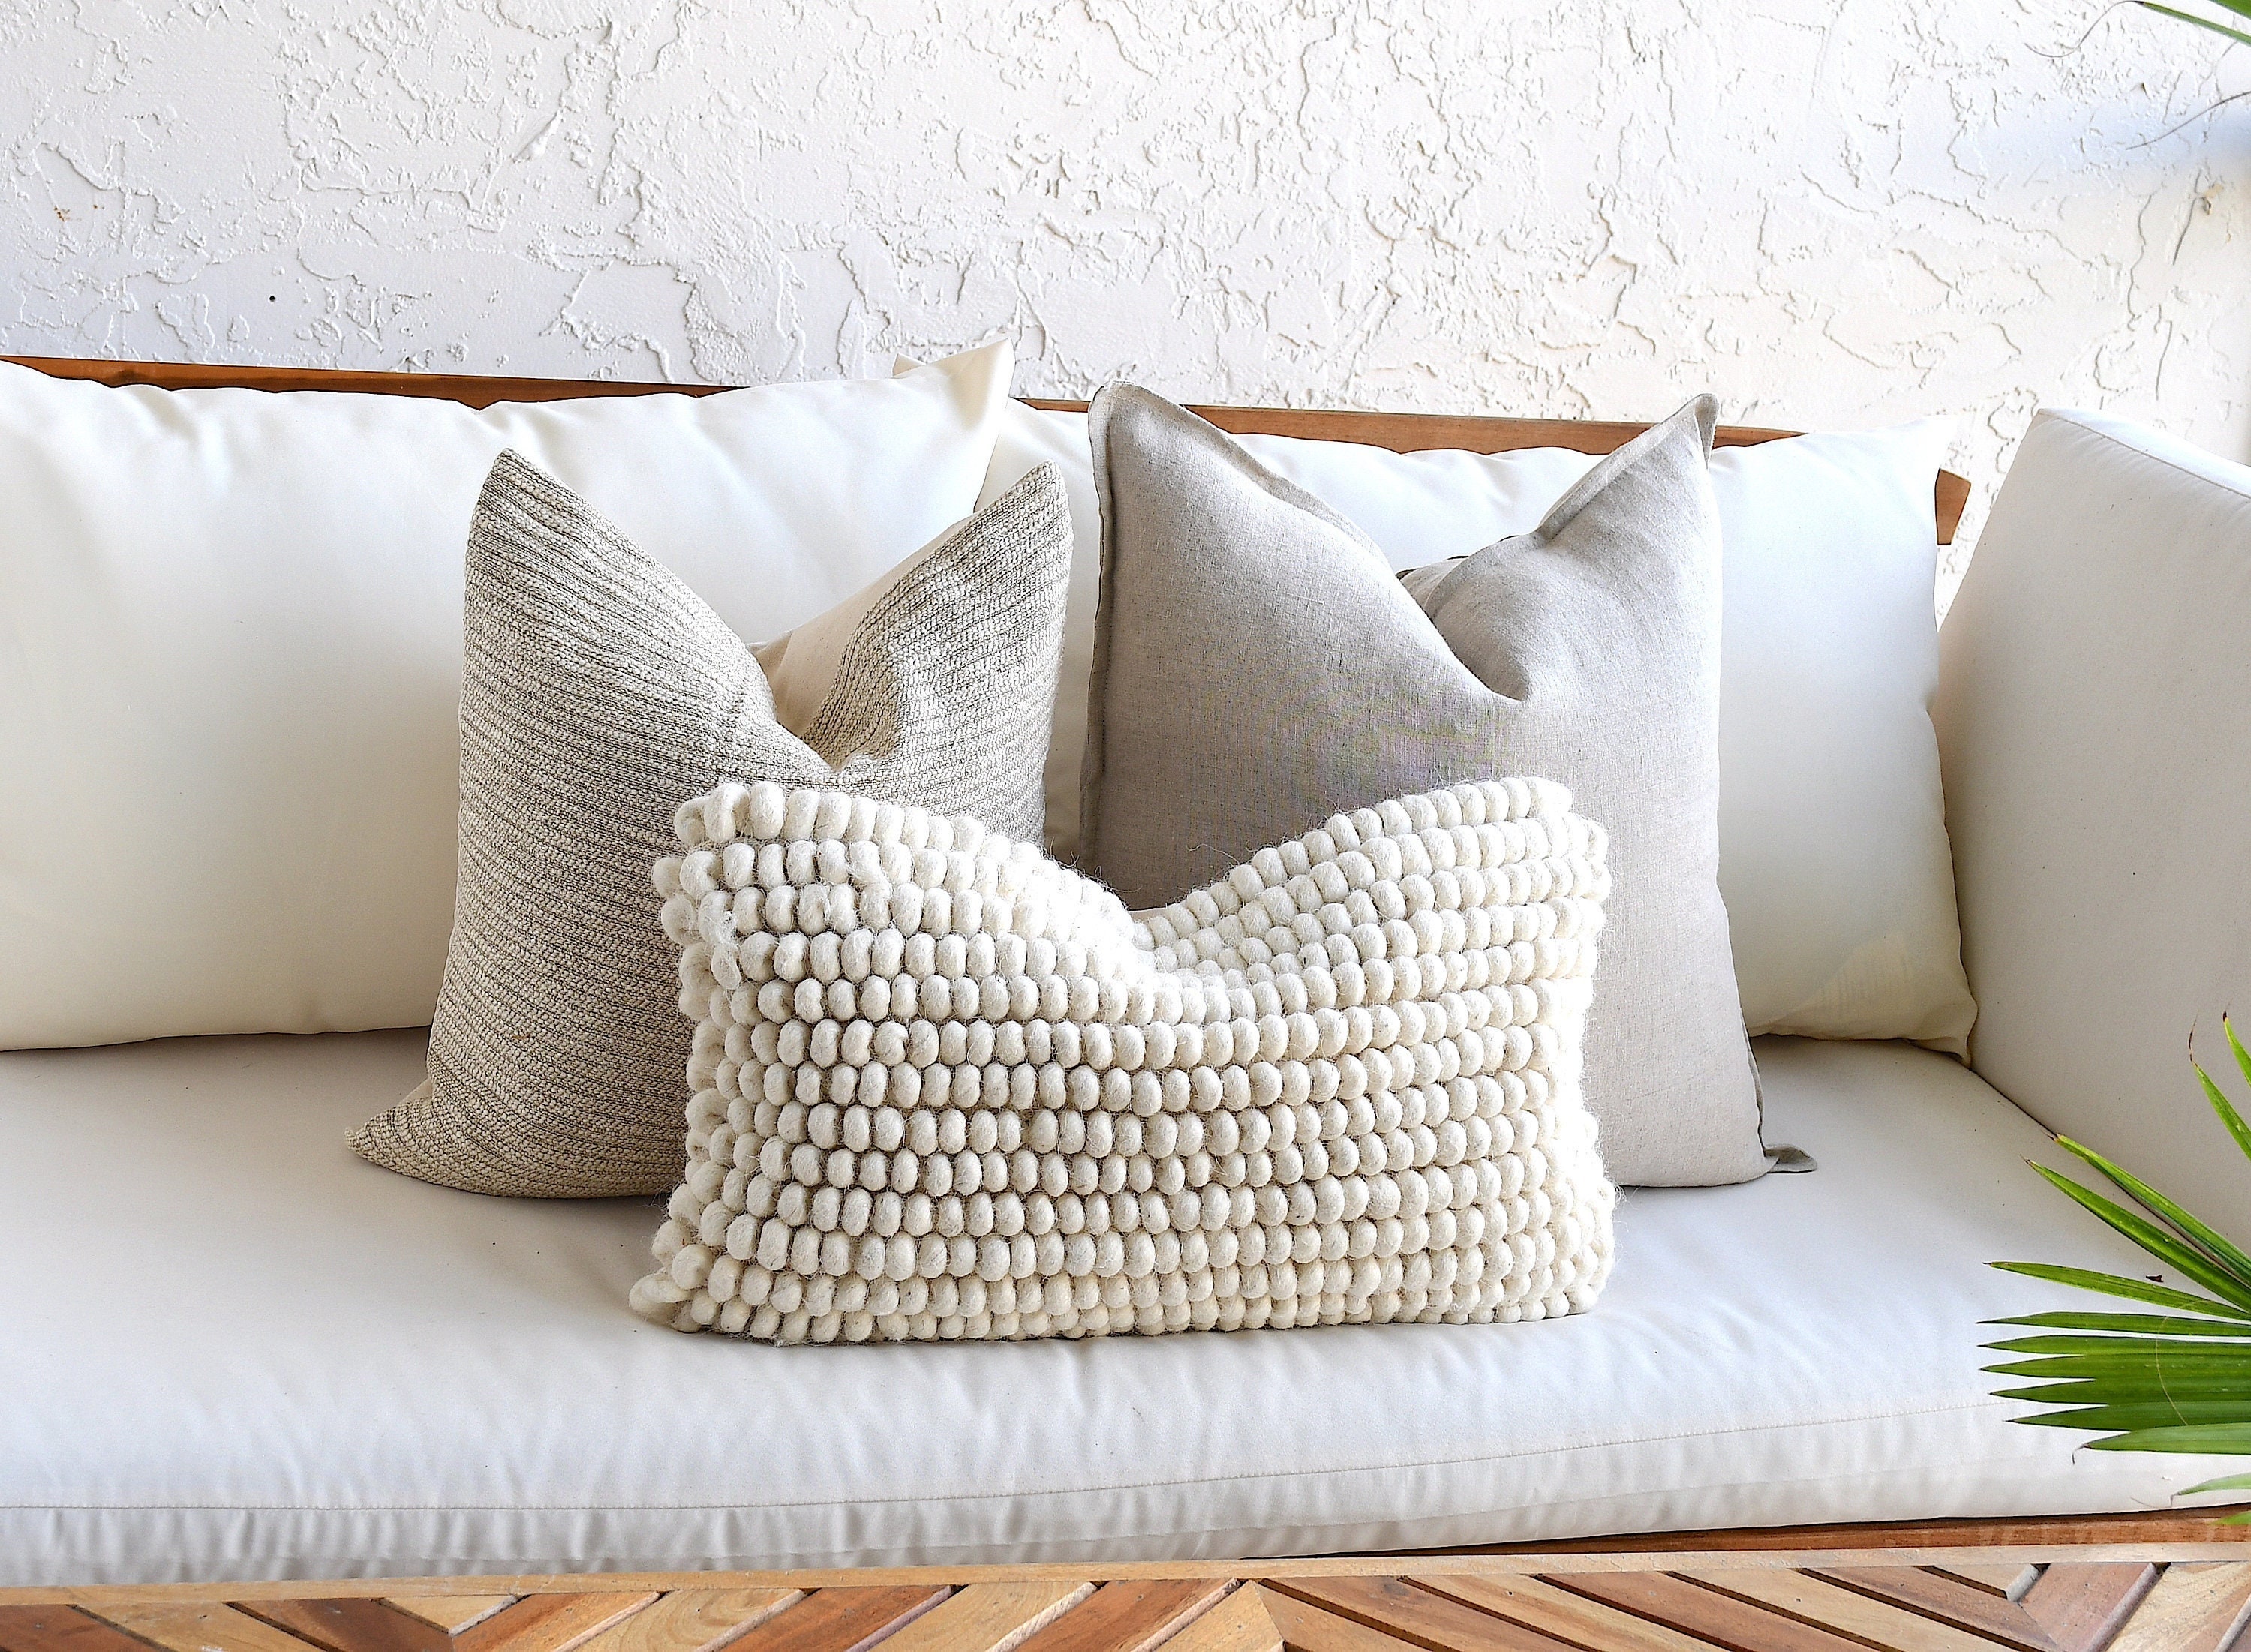  blue page Boho Throw Pillow Covers, Black and Cream White, Set  of 2 Modern Farmhouse Accent Home Decor, Neutral Woven Decorative Pillow  Covers for Couch/Bed : Home & Kitchen